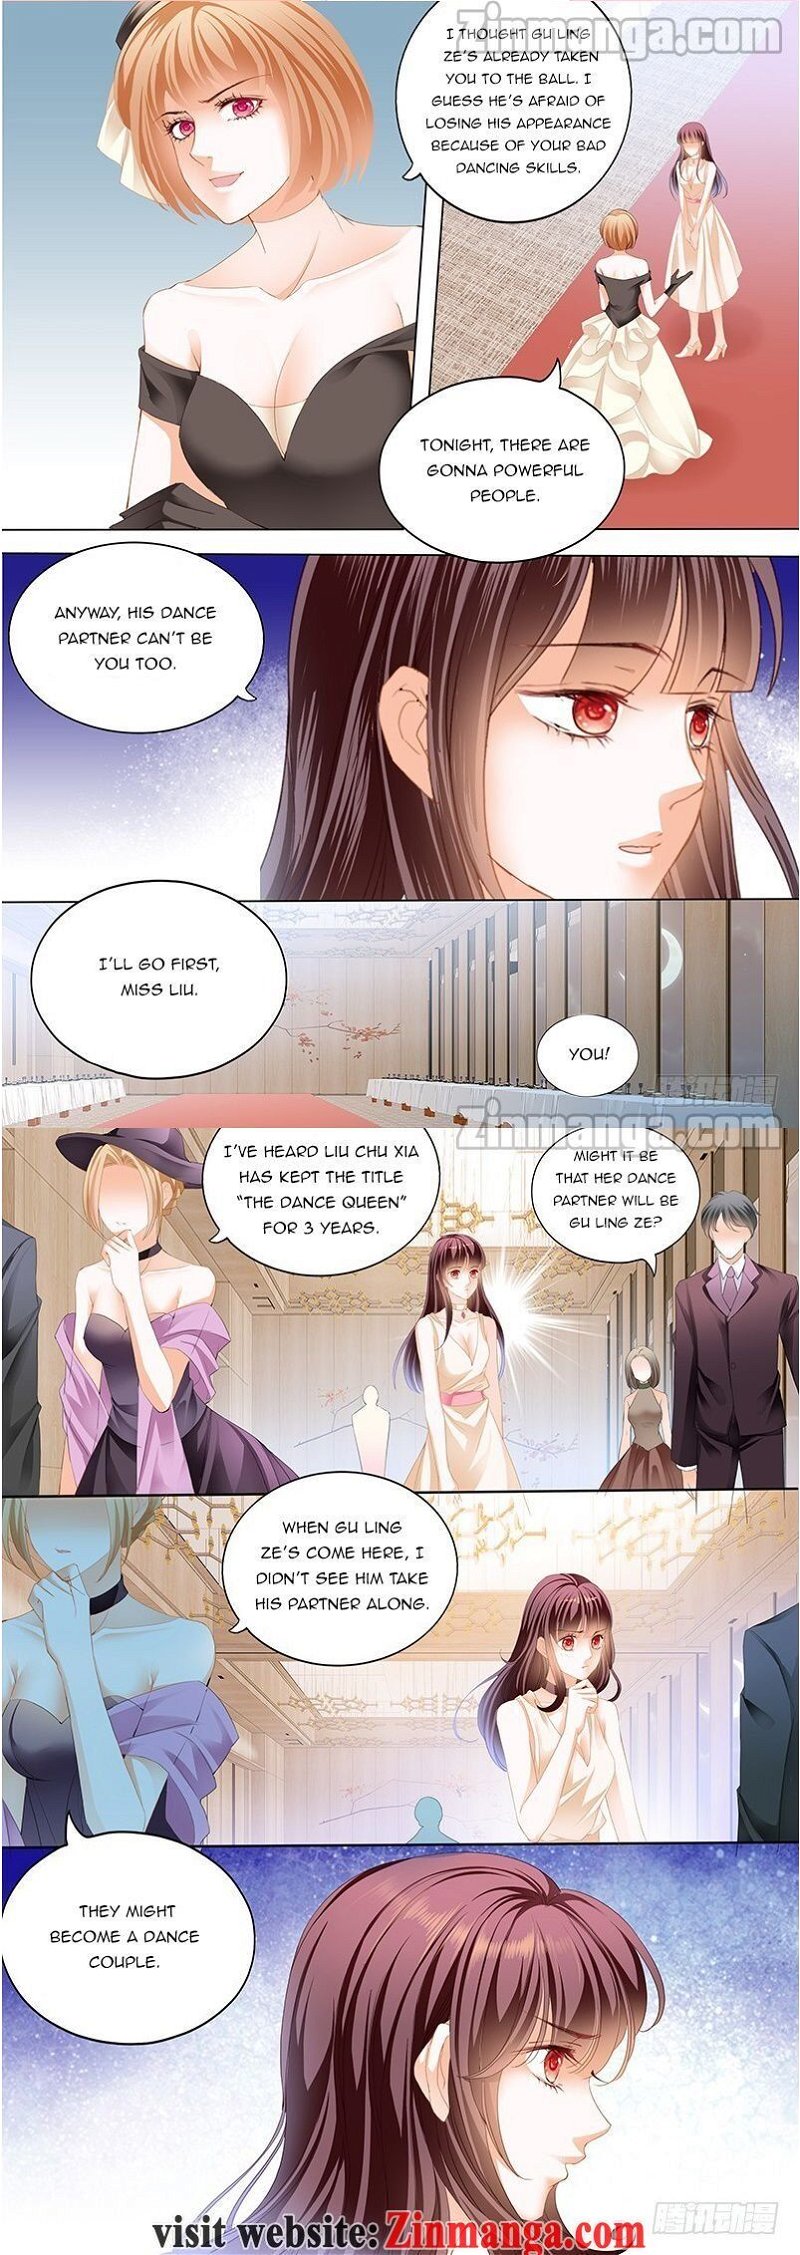 The Beautiful Wife of the Whirlwind Marriage Chapter 180 - Page 3